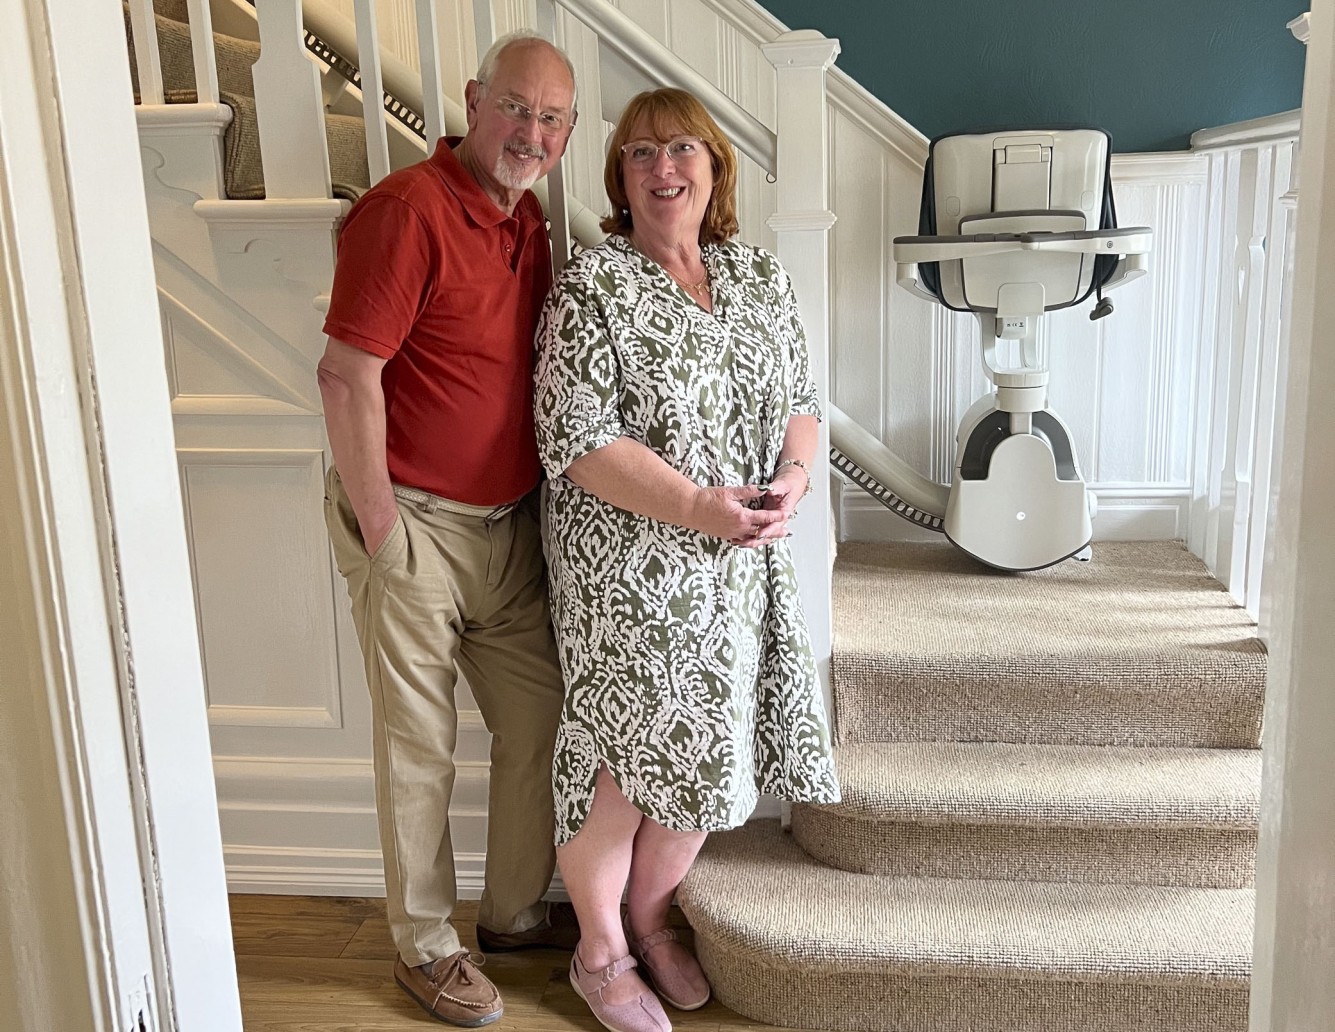 The perfect match - Flow2 stairlift from thyssenkrupp